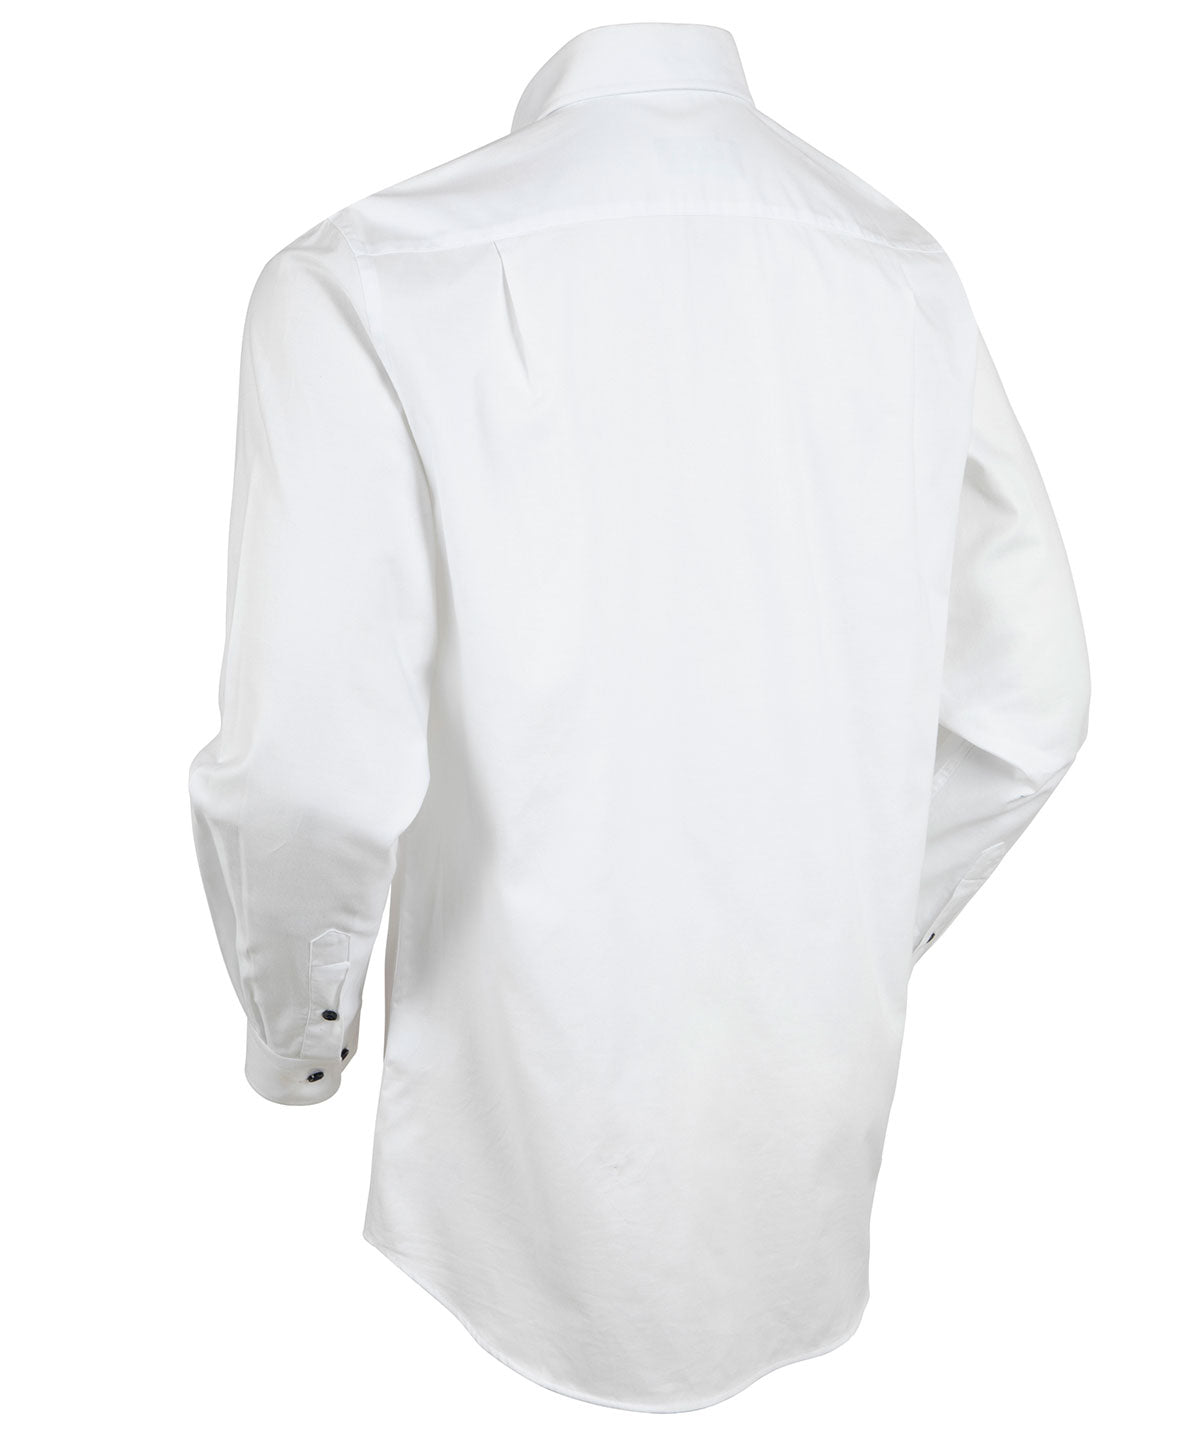 B91xZ Shirts for Men Scoop Neck Long Sleeve Shirts Fitted Tops,White XL